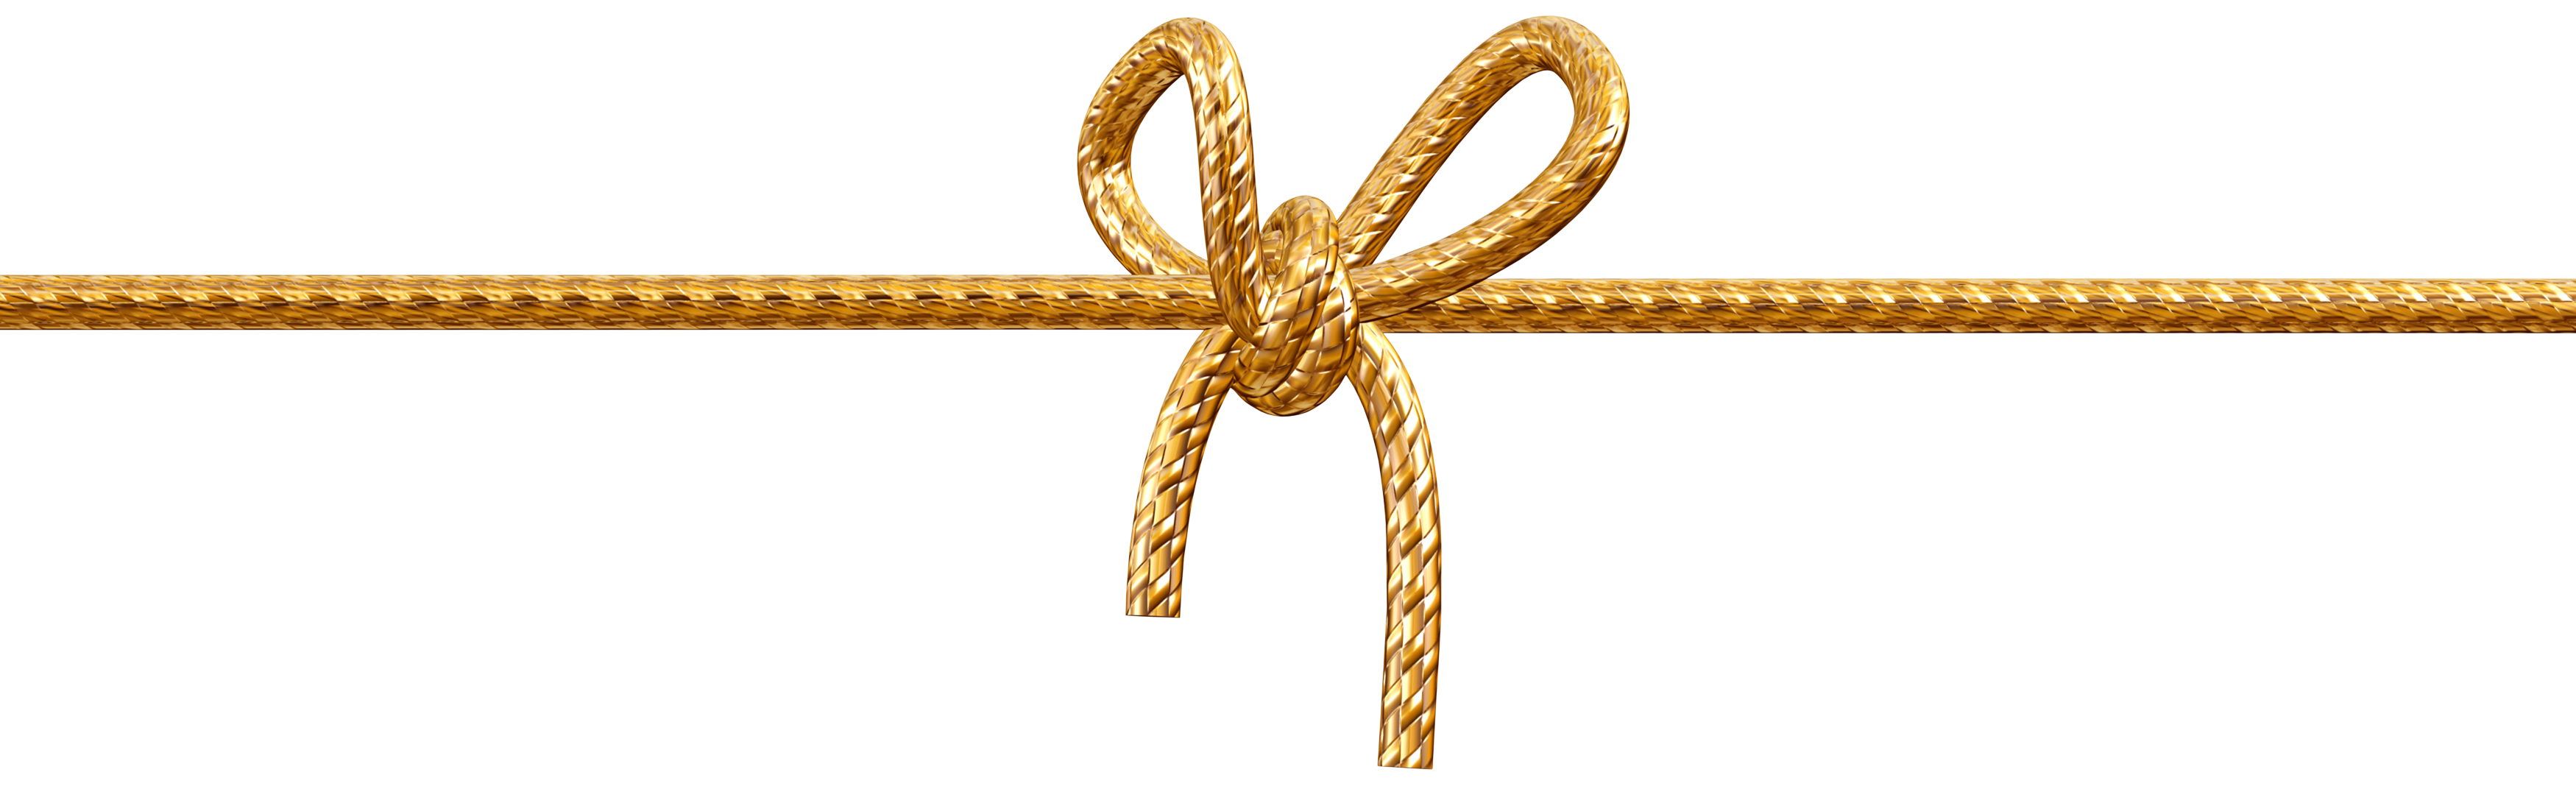 needle clipart gold string